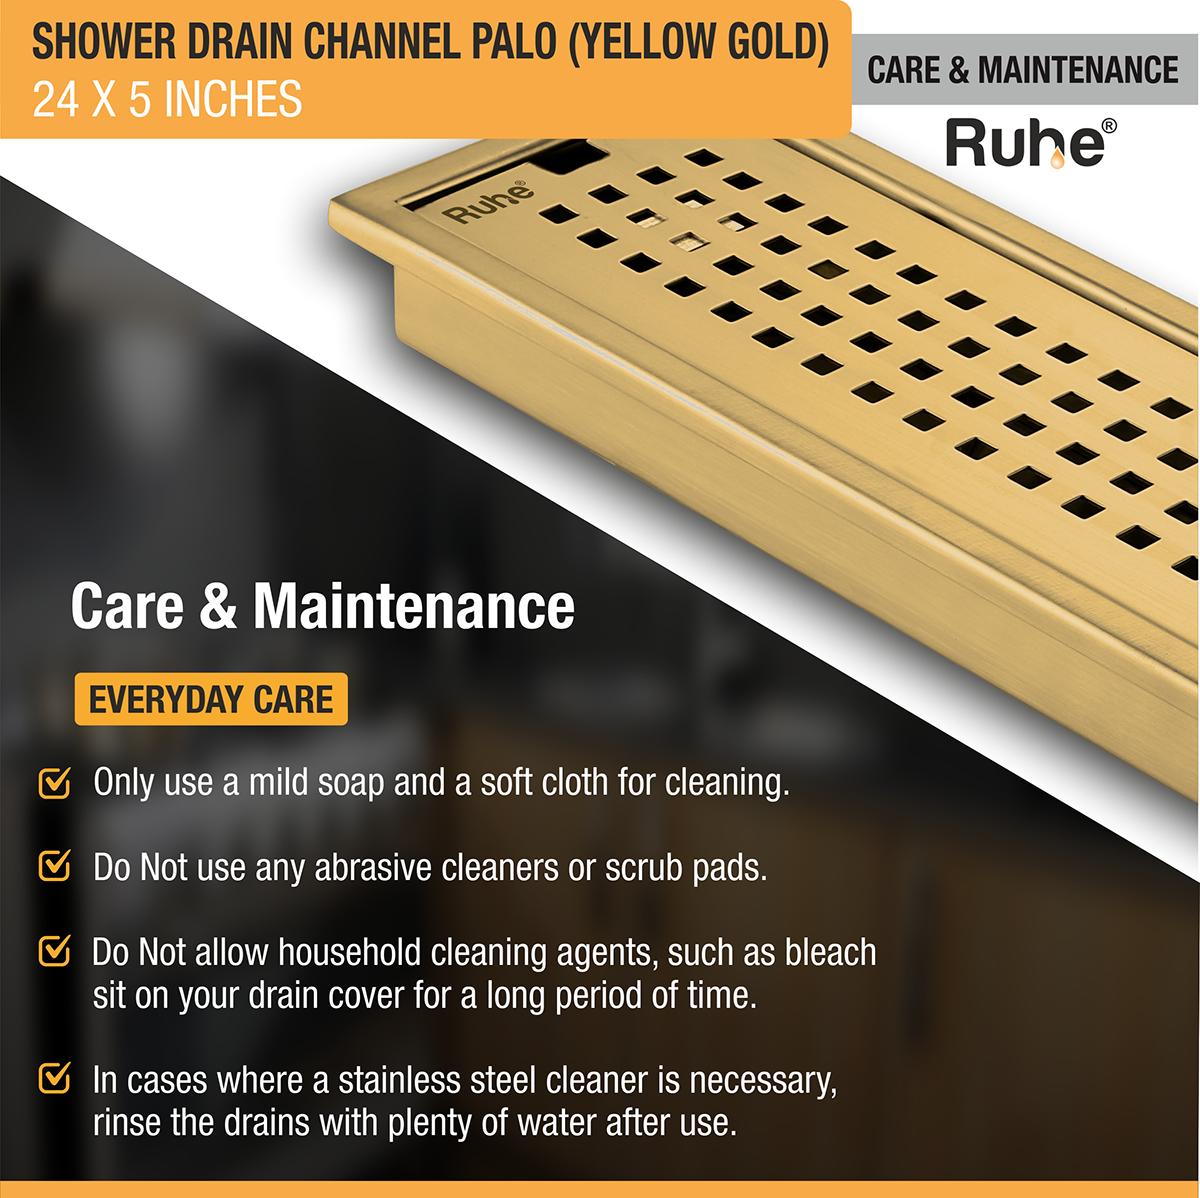 Palo Shower Drain Channel (24 x 5 Inches) YELLOW GOLD care and maintenance